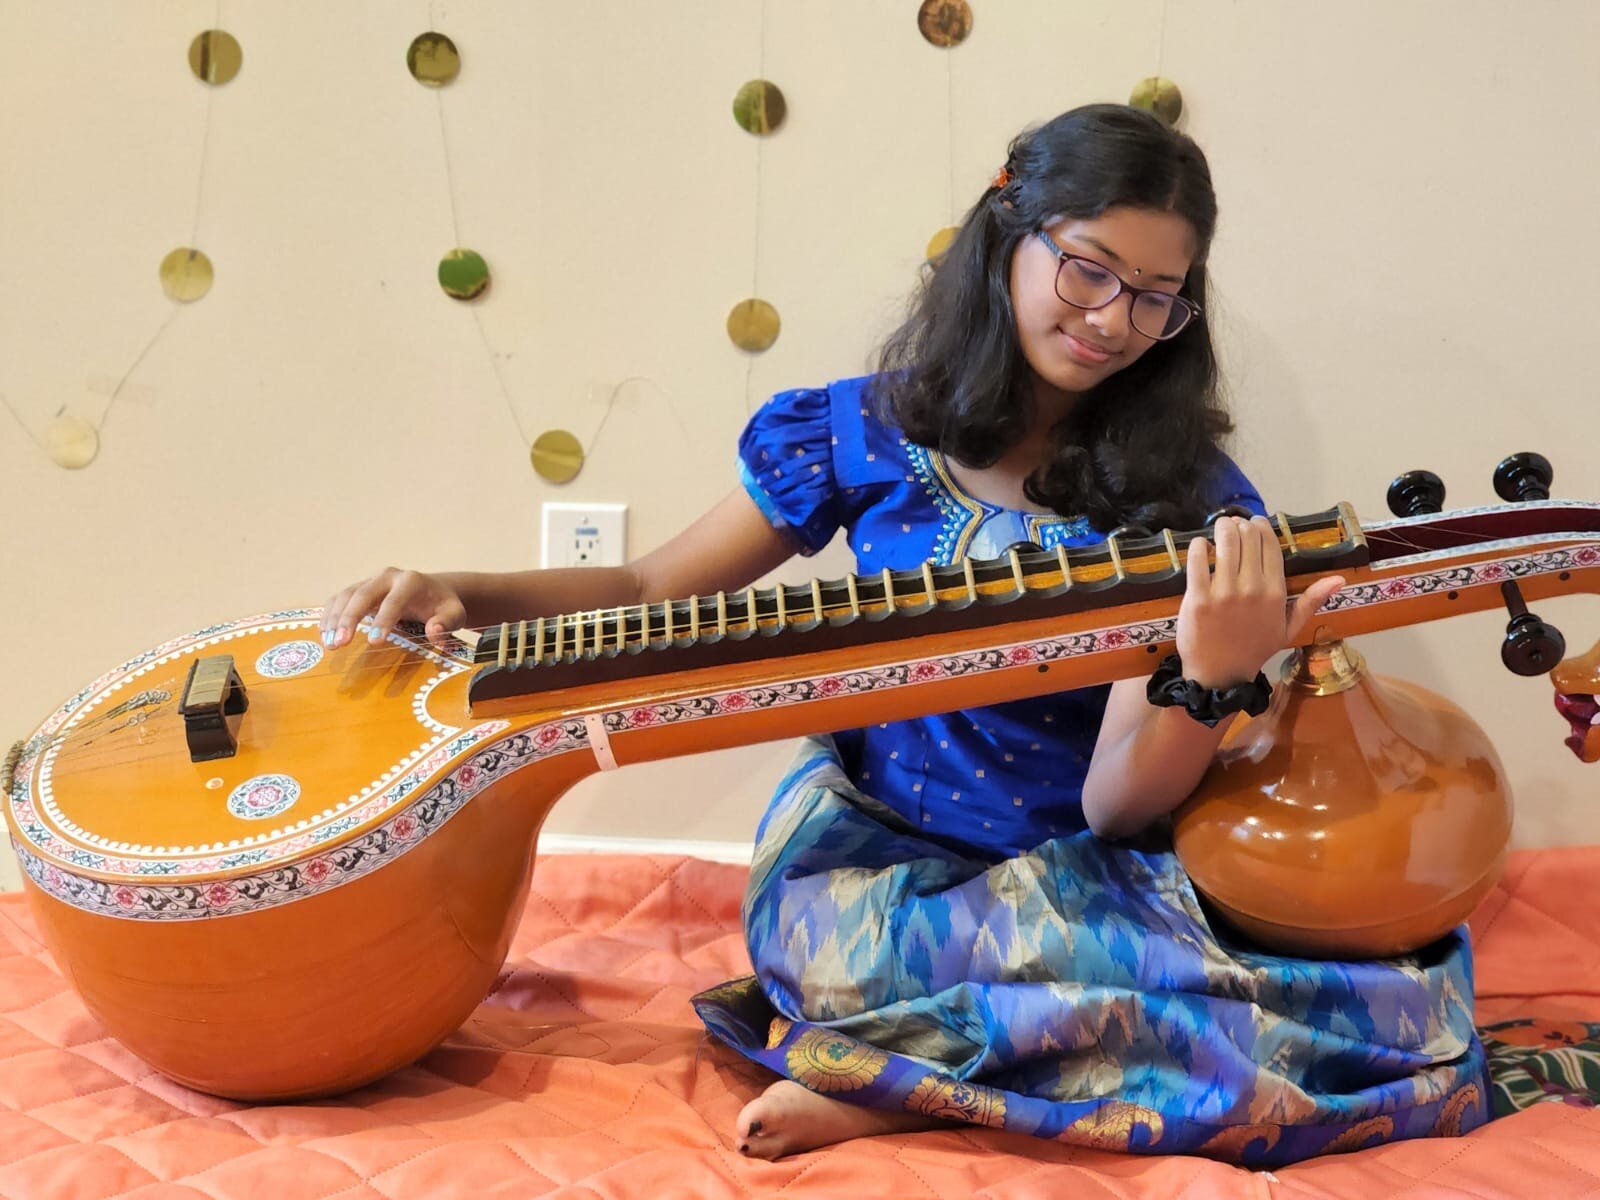 Sai Santhosh plays the Veena, a ancient Indian string instrument.